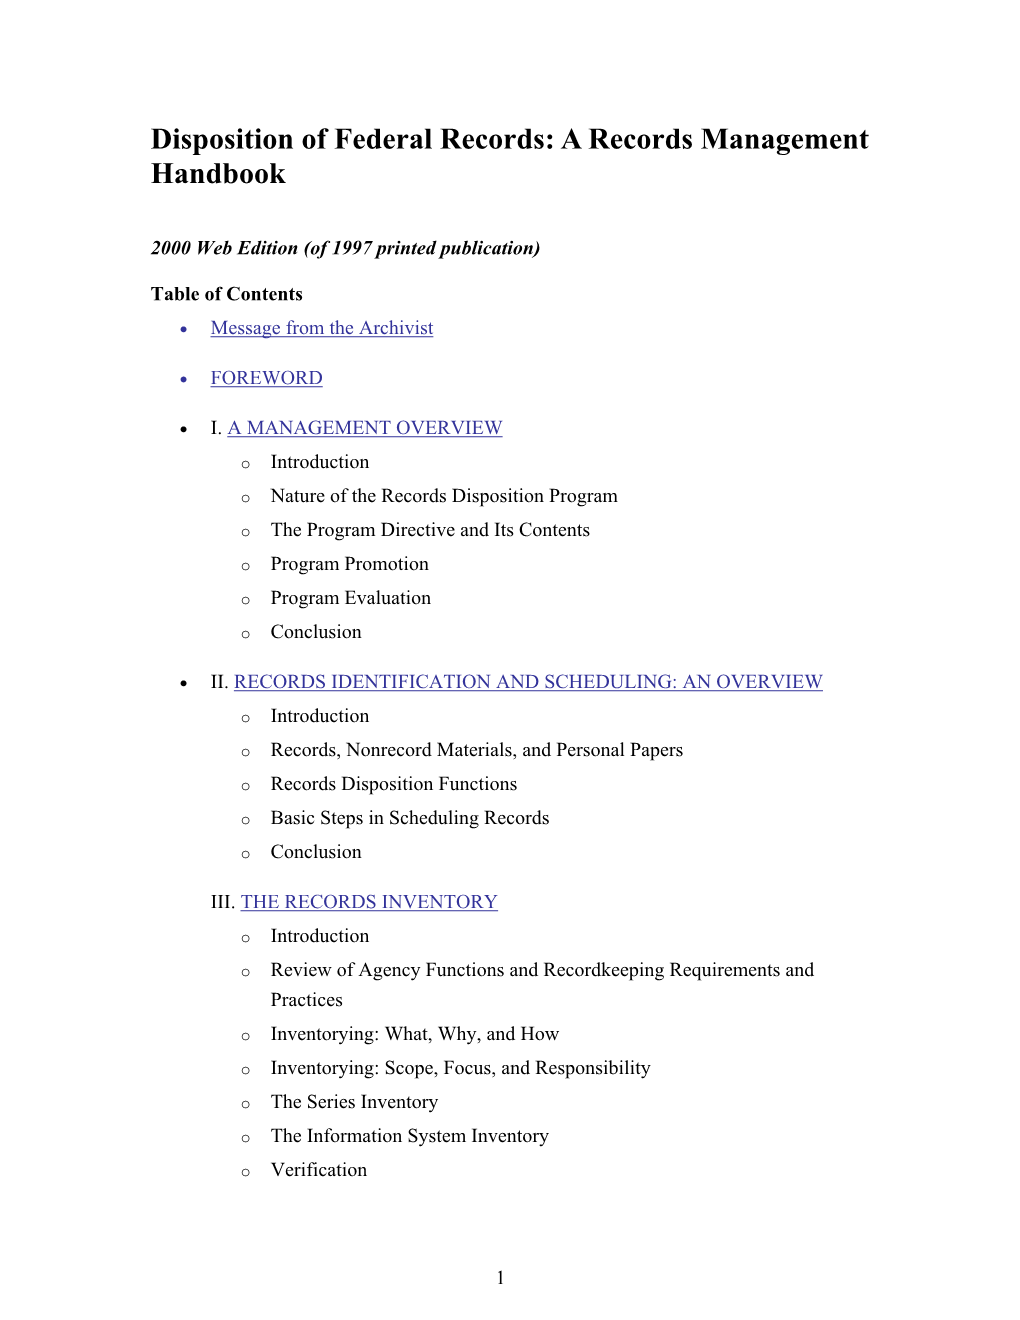 Disposition of Federal Records: a Records Management Handbook